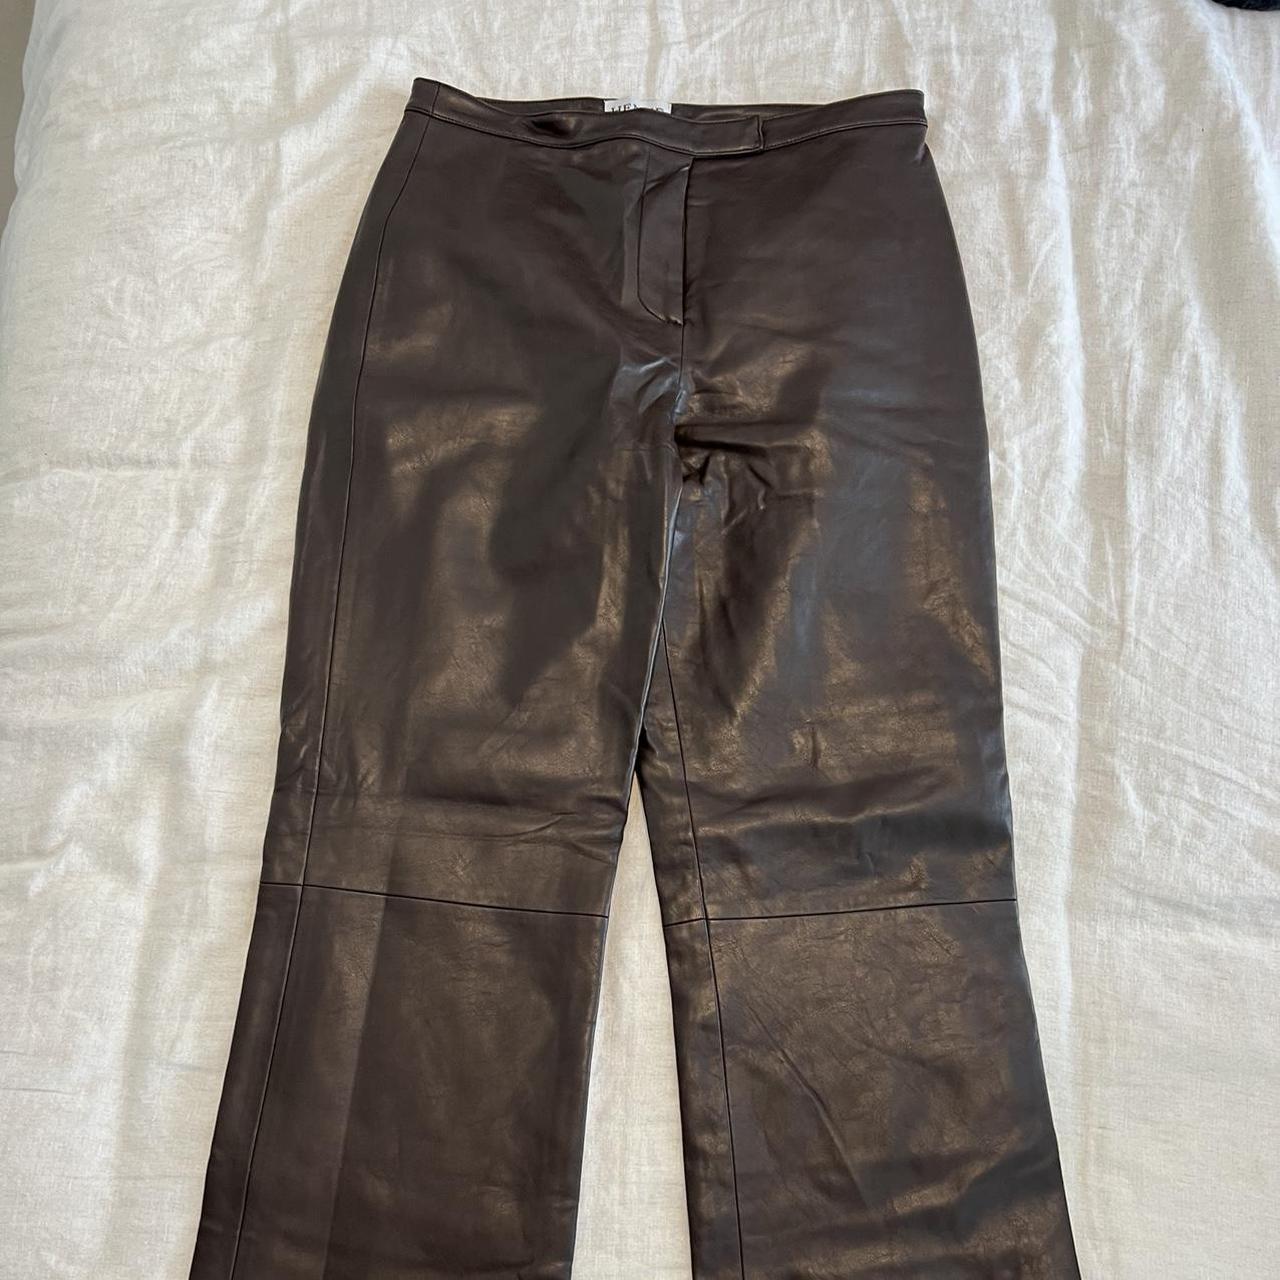 Henne Leather Pants Perfect condition - worn once - Depop